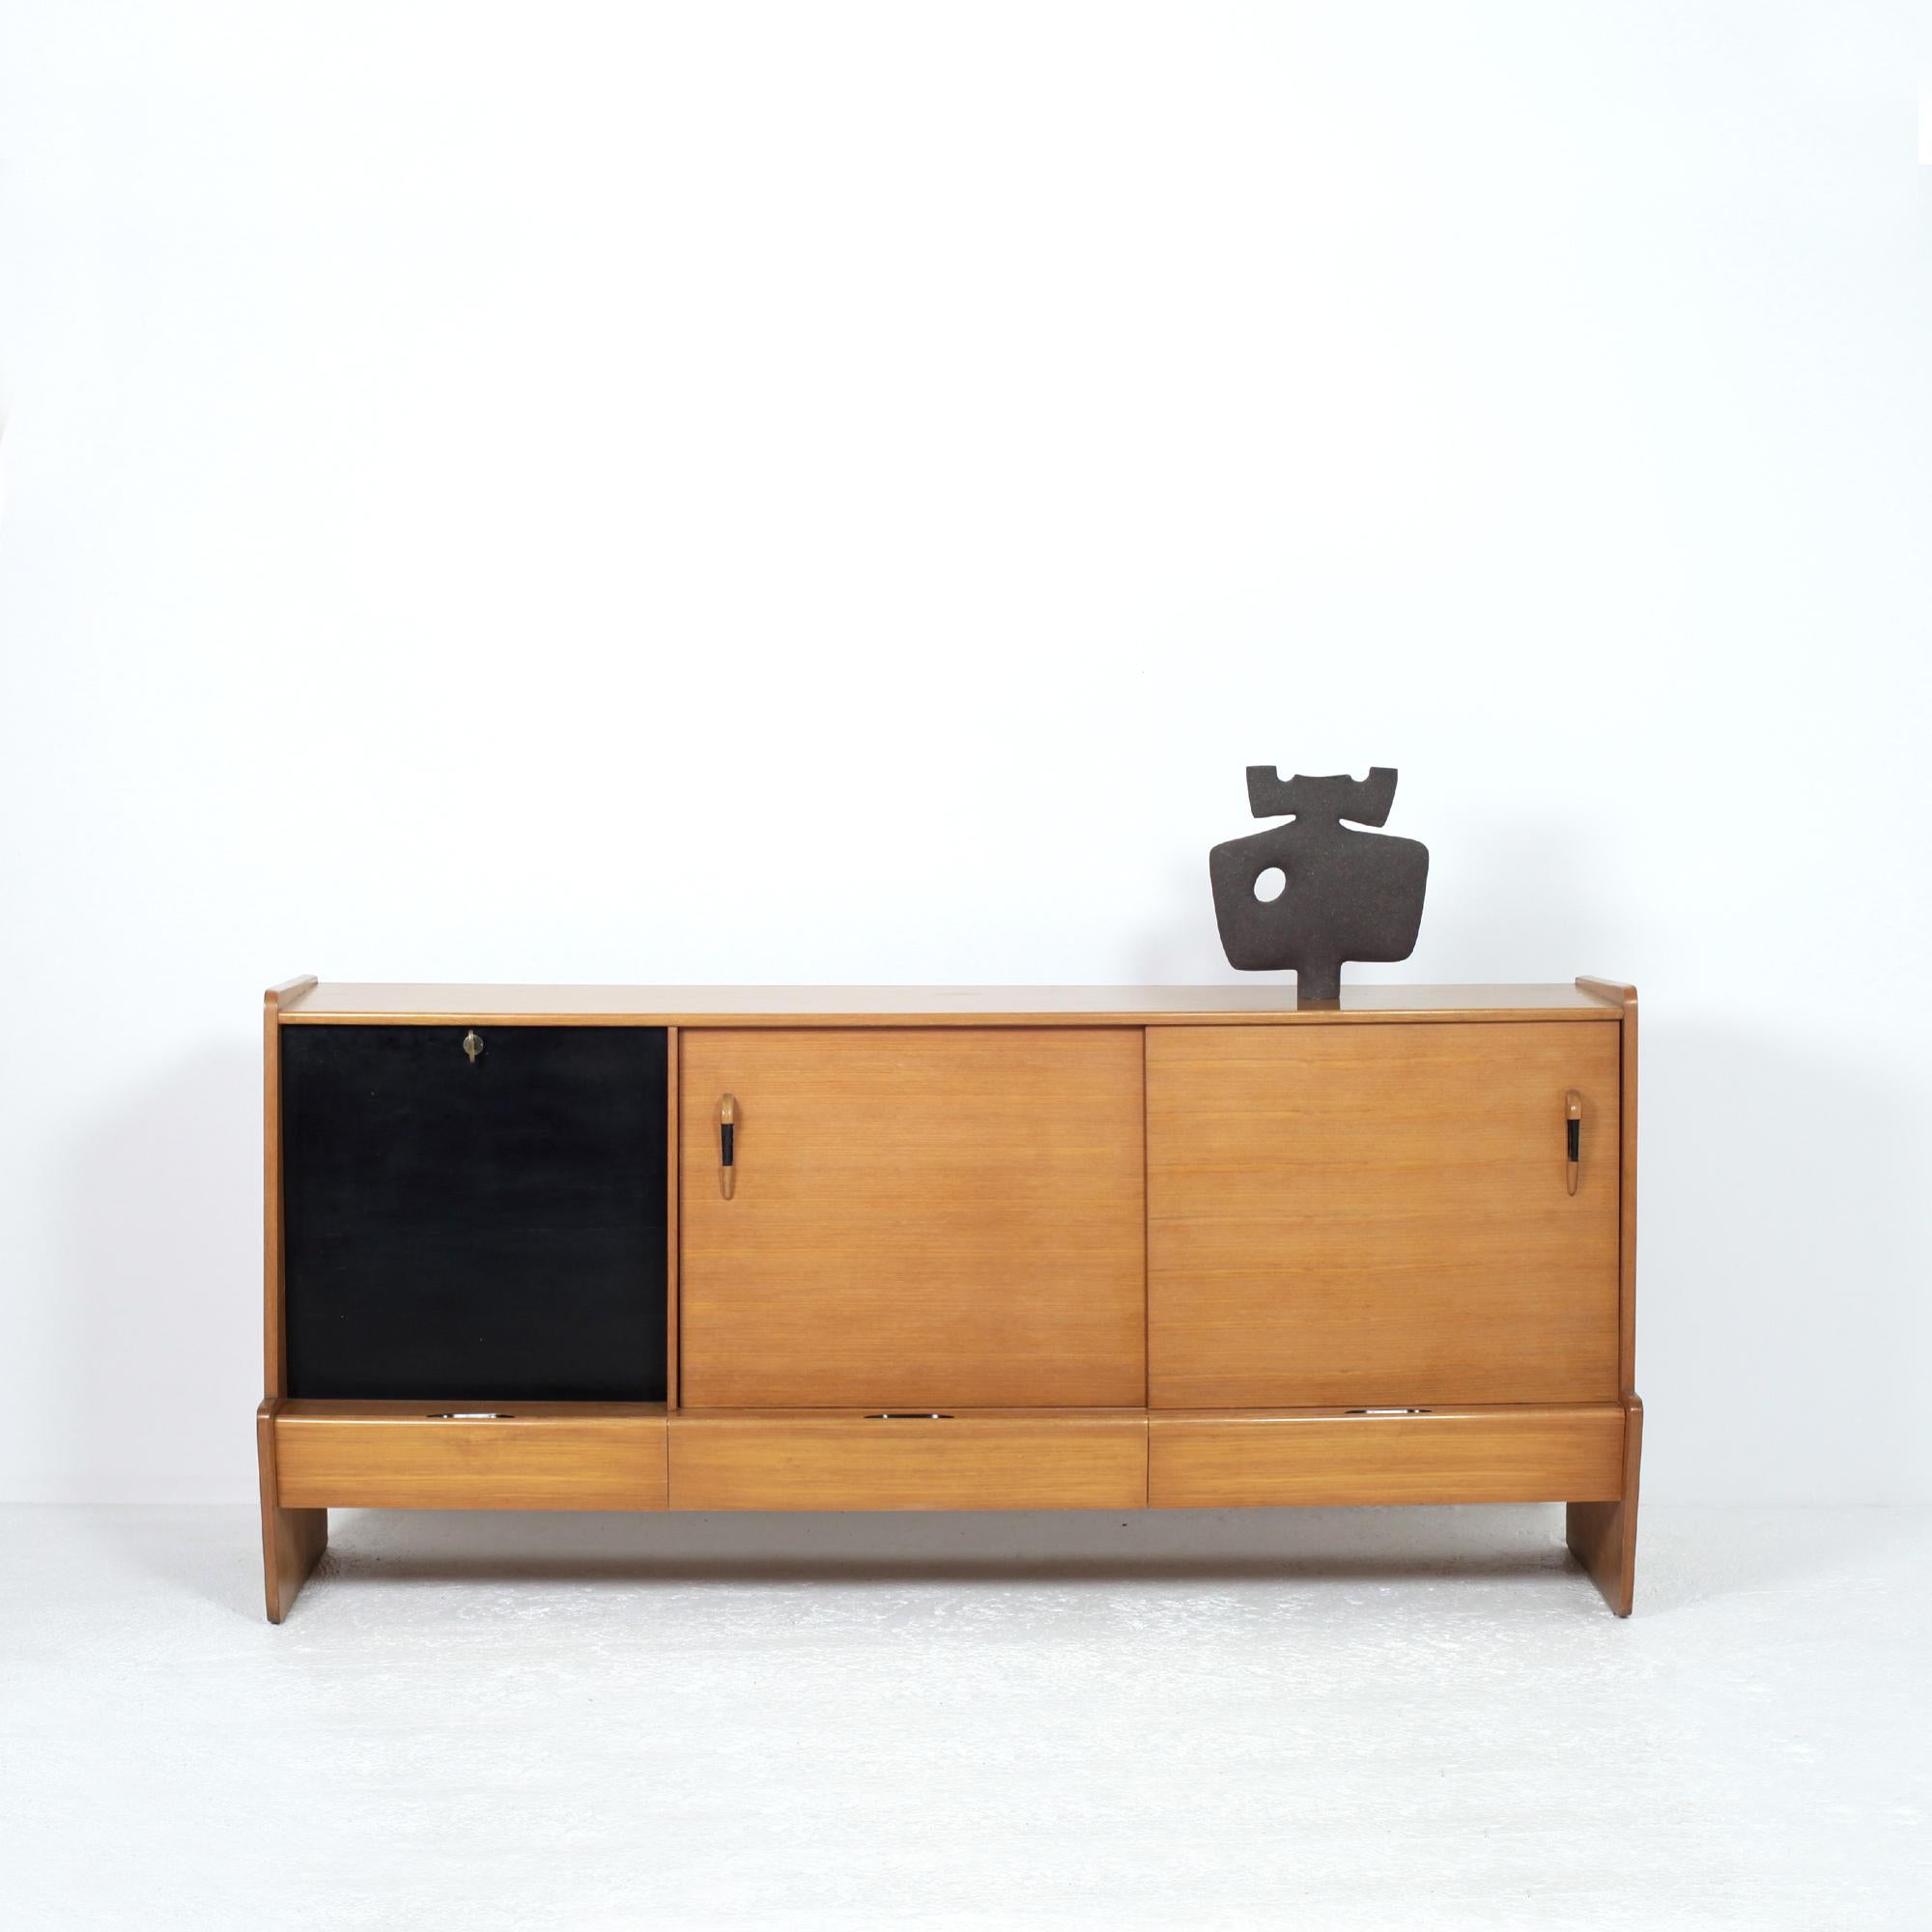 French Midcentury Sideboard by Roche Bobois circa 1950 For Sale 5